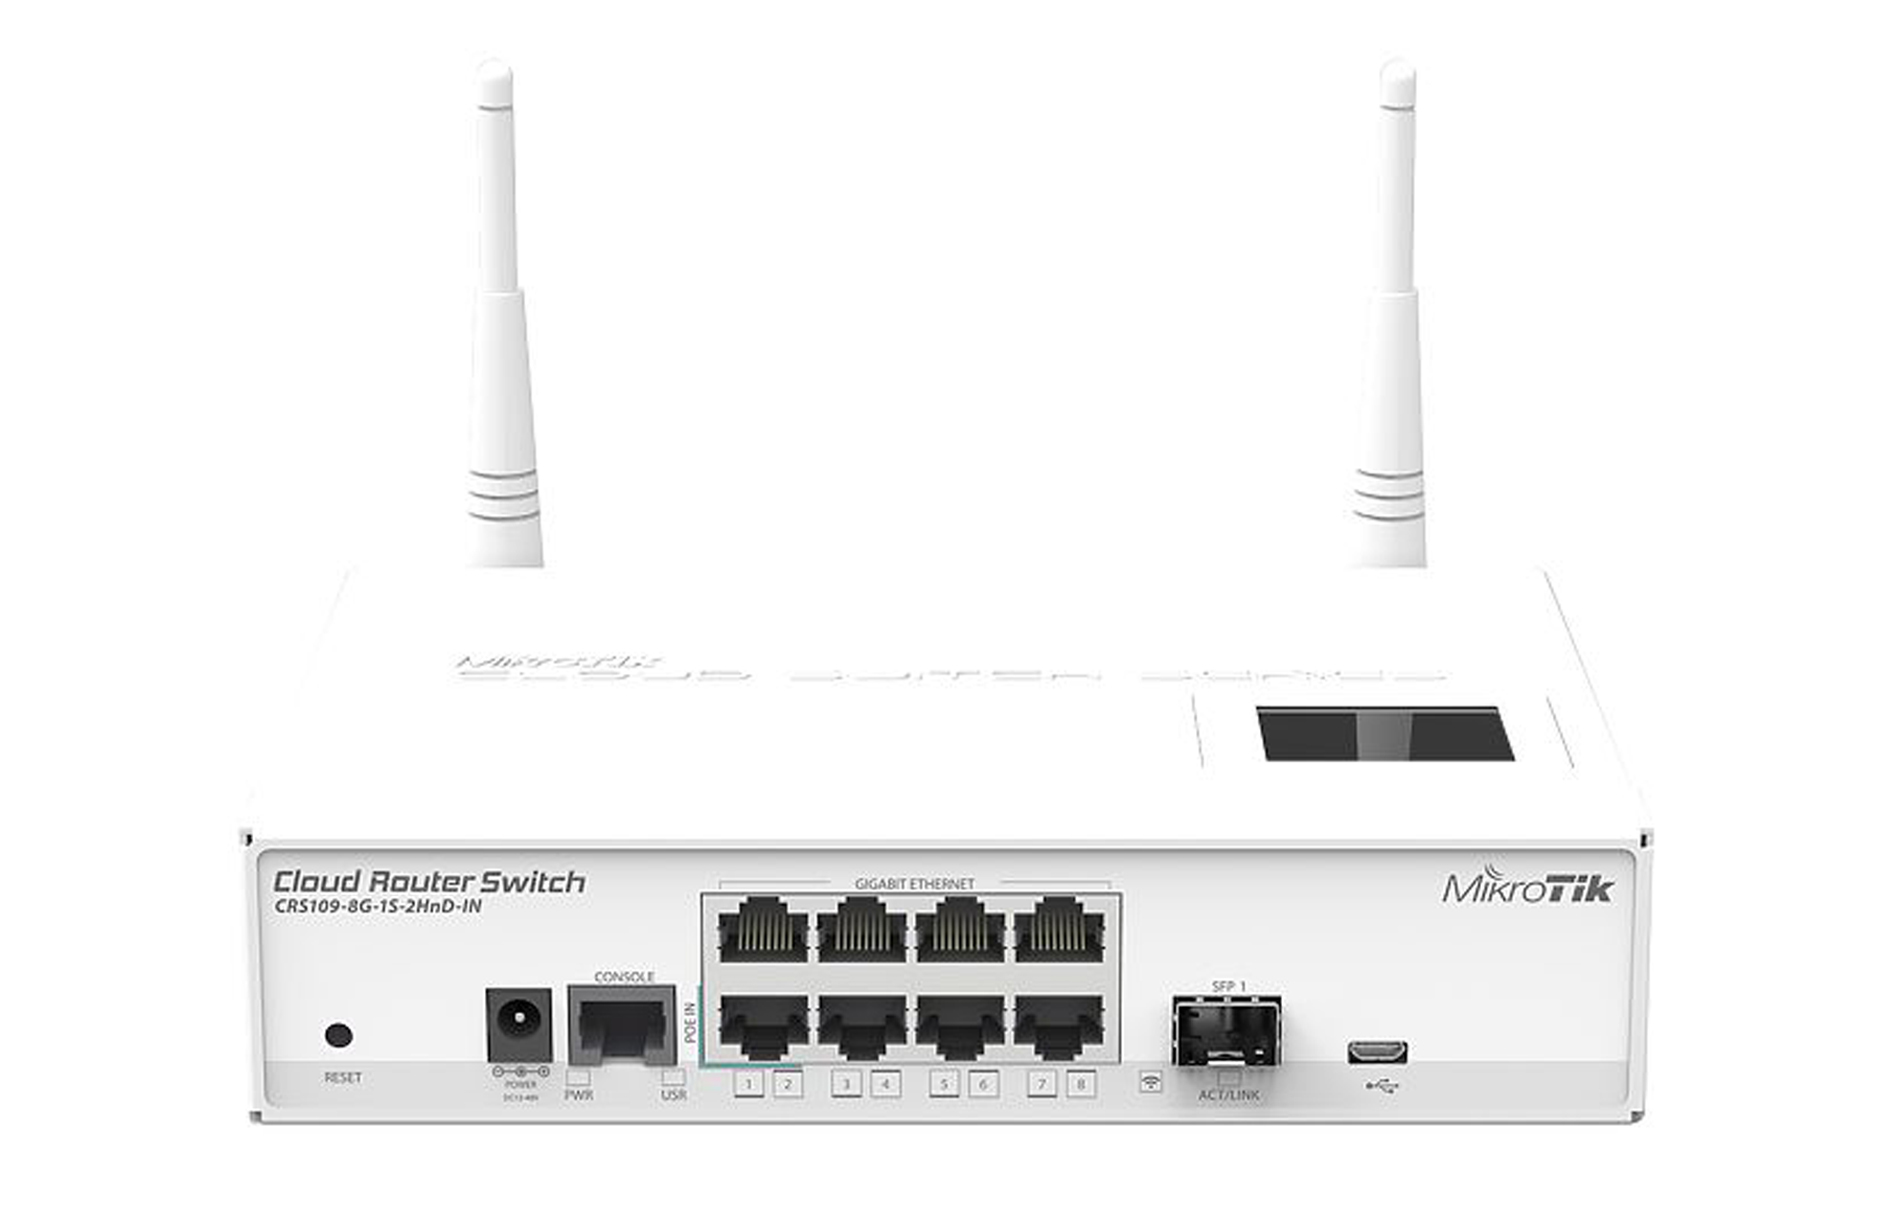 MiKroTik Cloud Router Switch CRS109-8G-1S-2HnD-IN